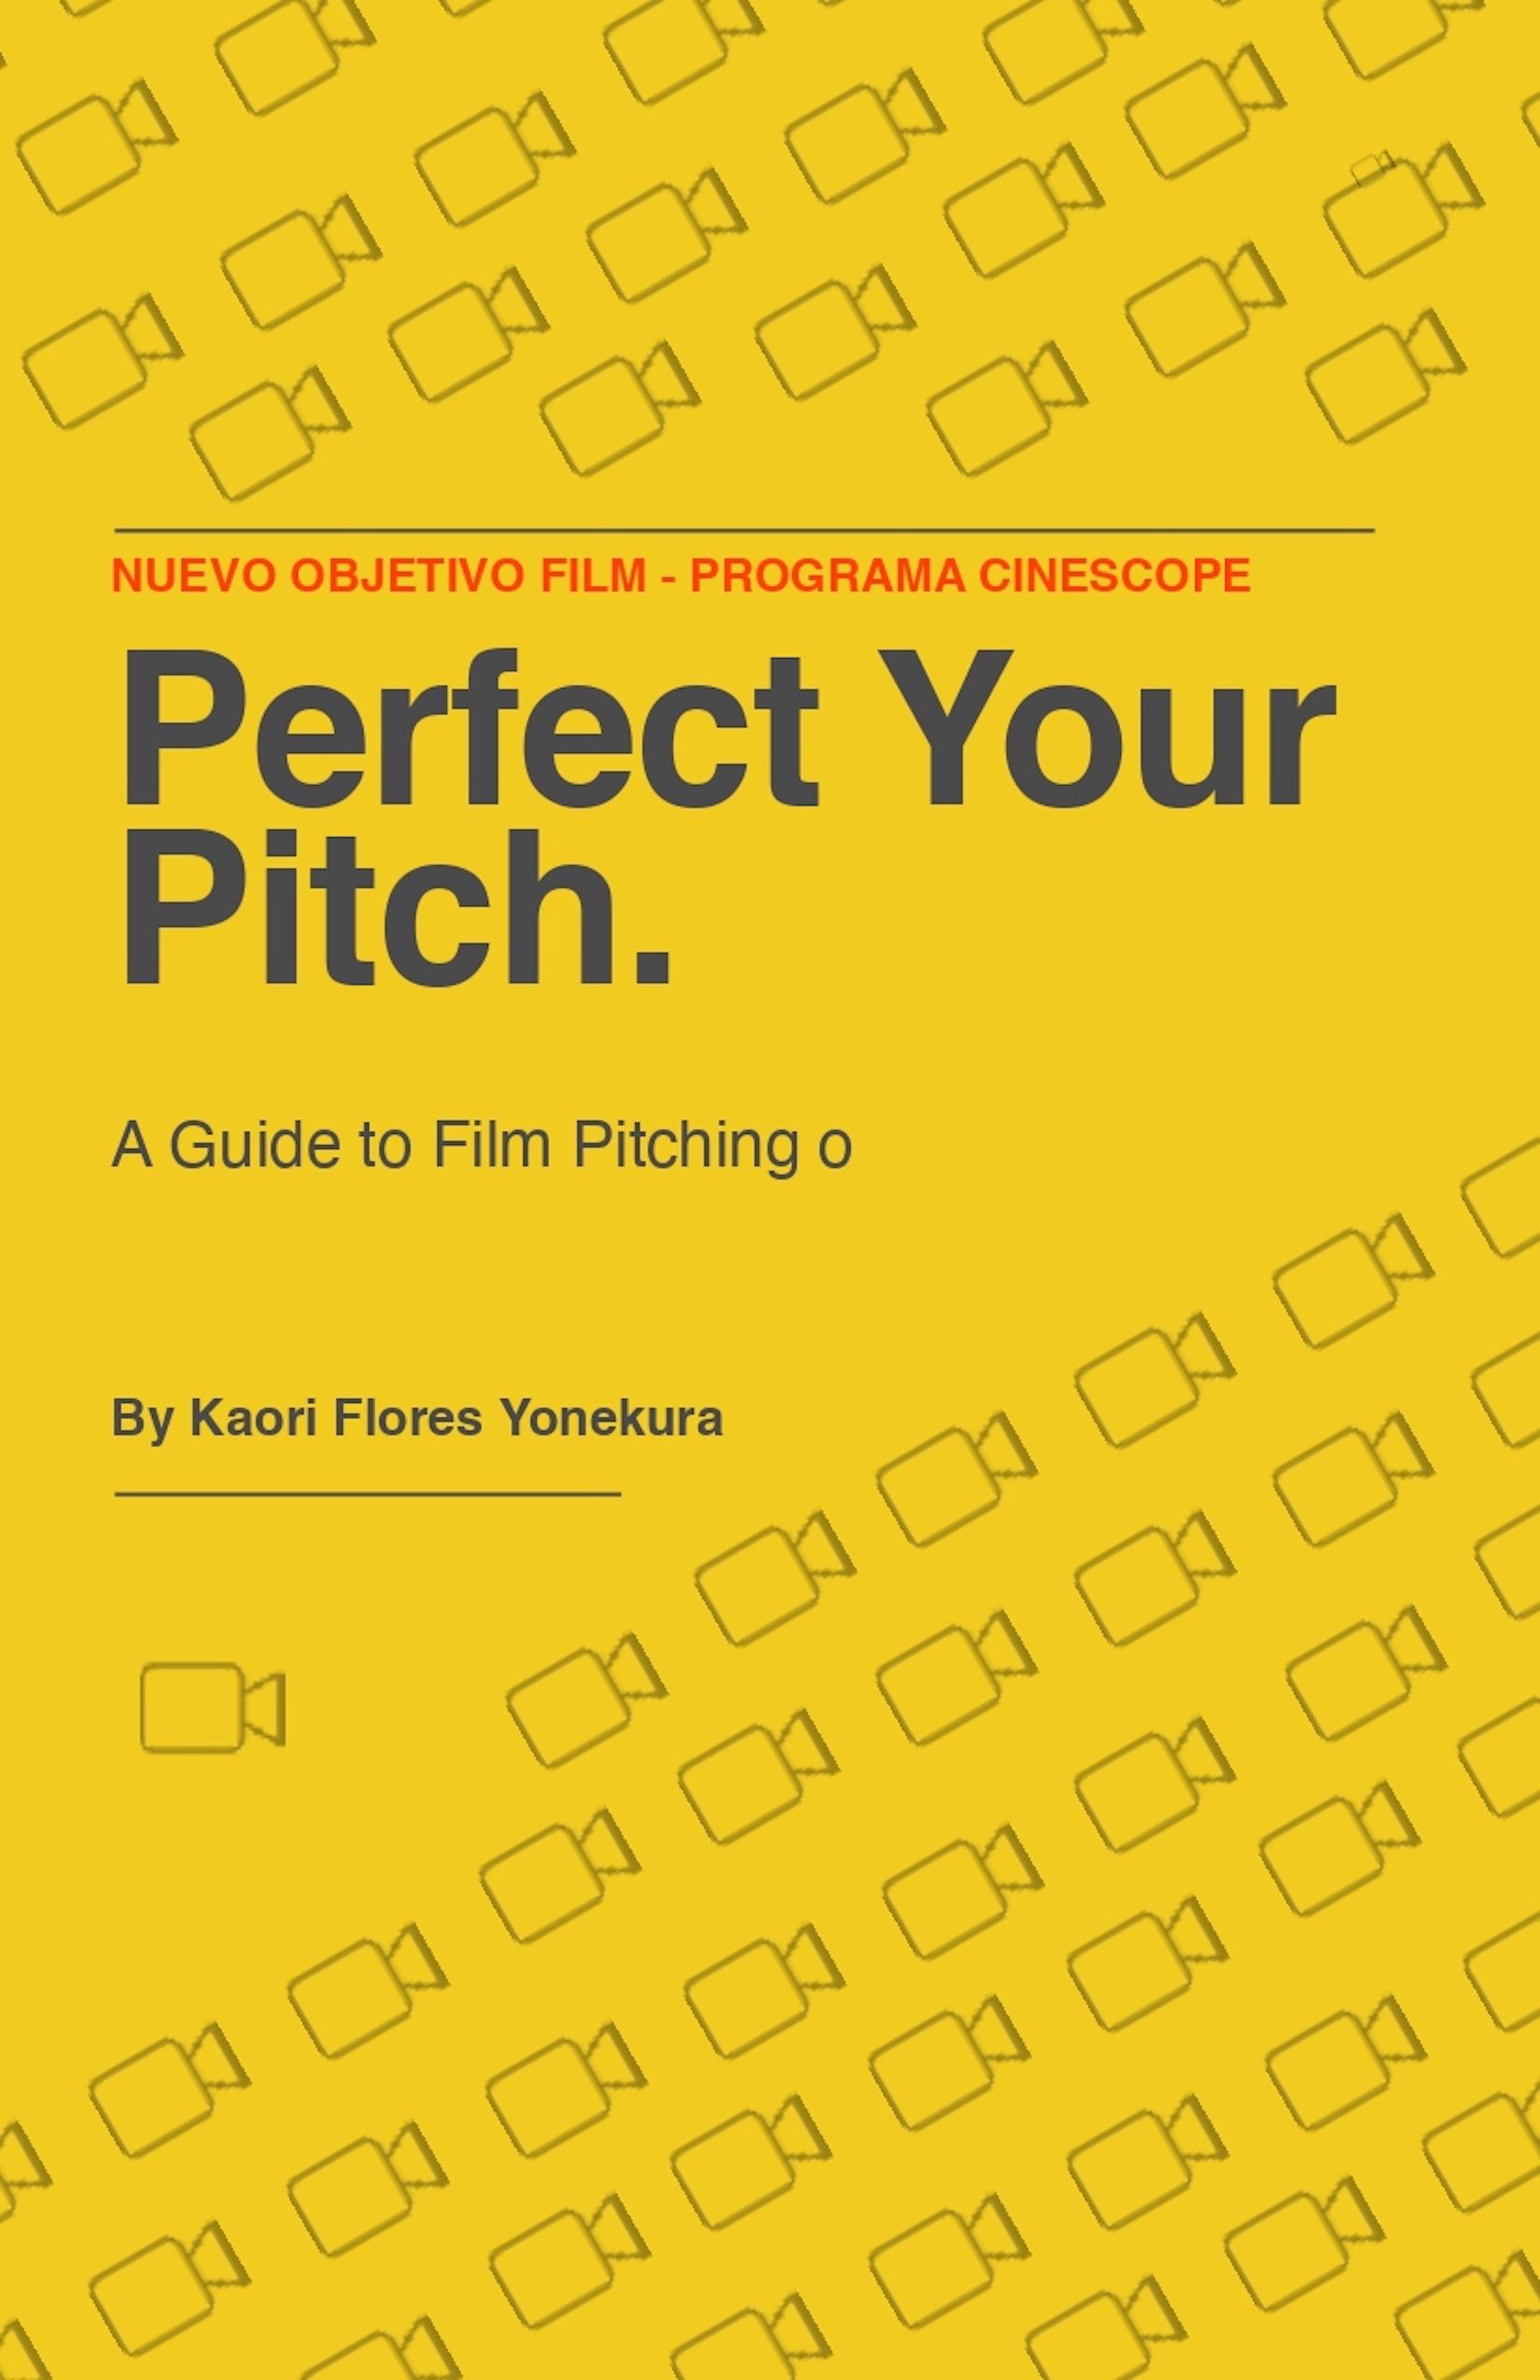 Book - Perfect your pitch.